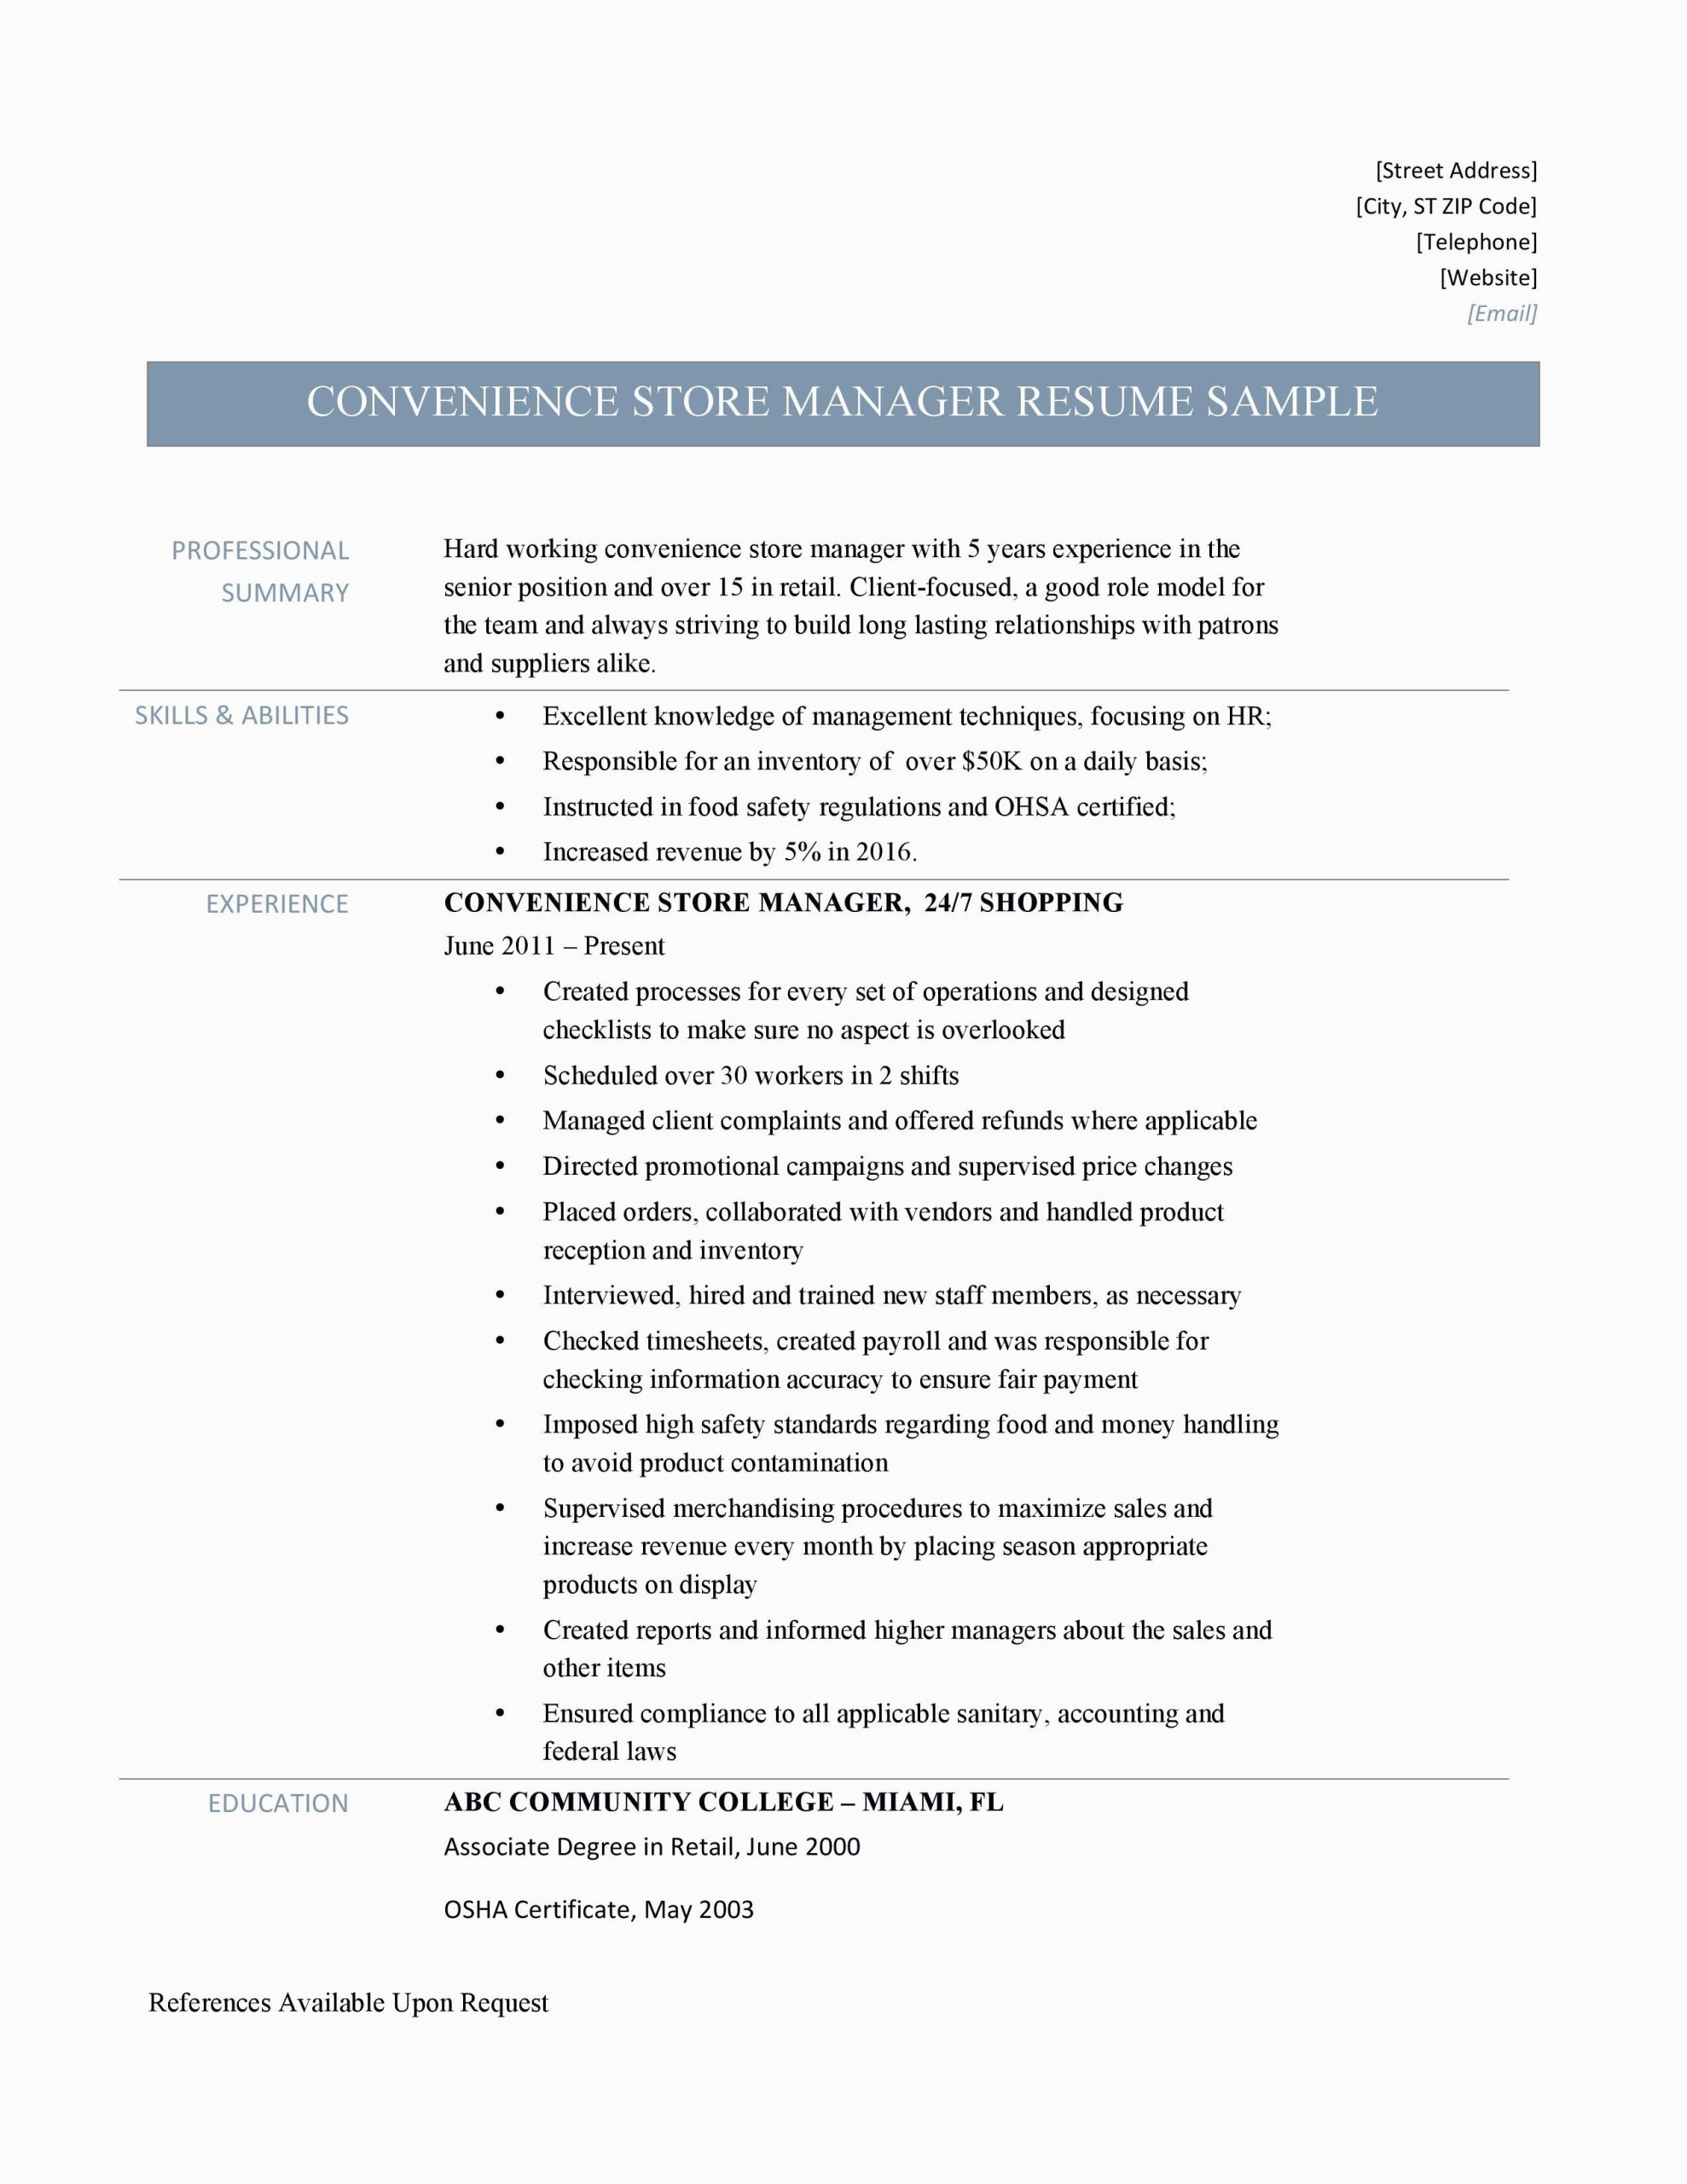 Sample Resume for assistant Manager In Convenience Store Store Manager Duties Resume Mryn ism